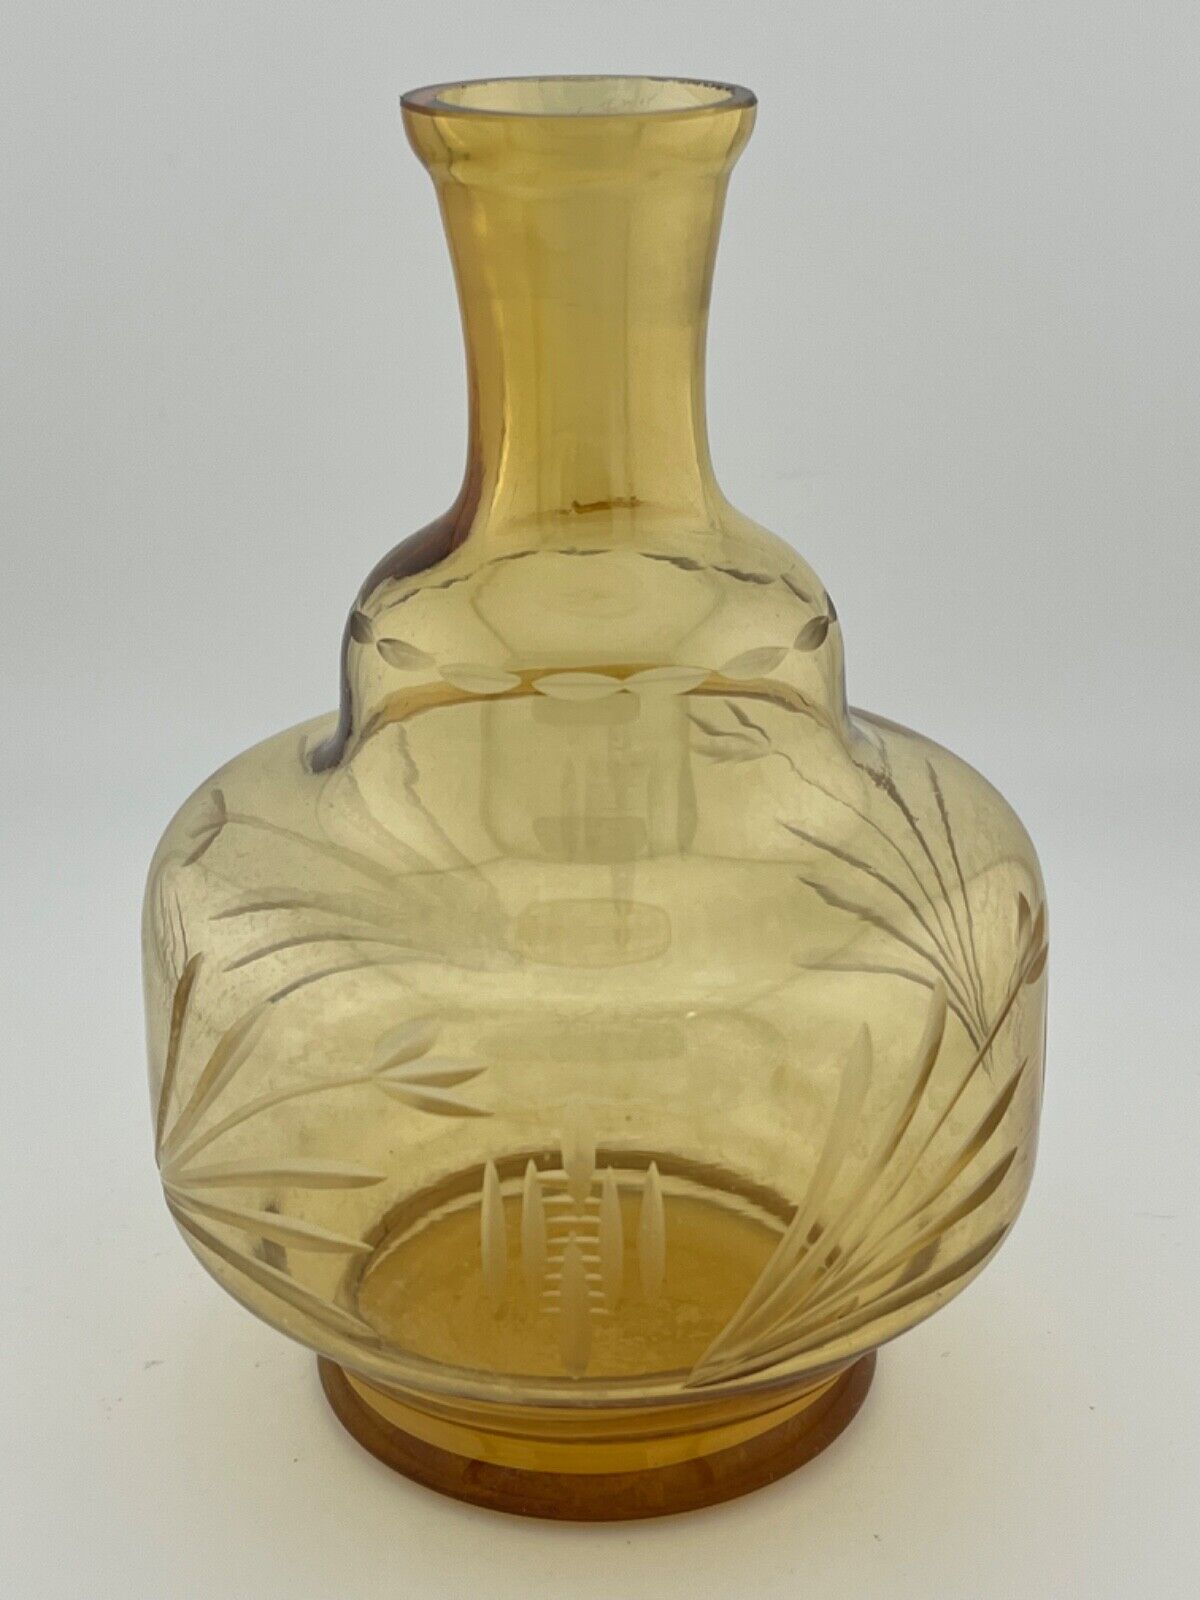 Vintage Amber Etched Cut Glass Decanter